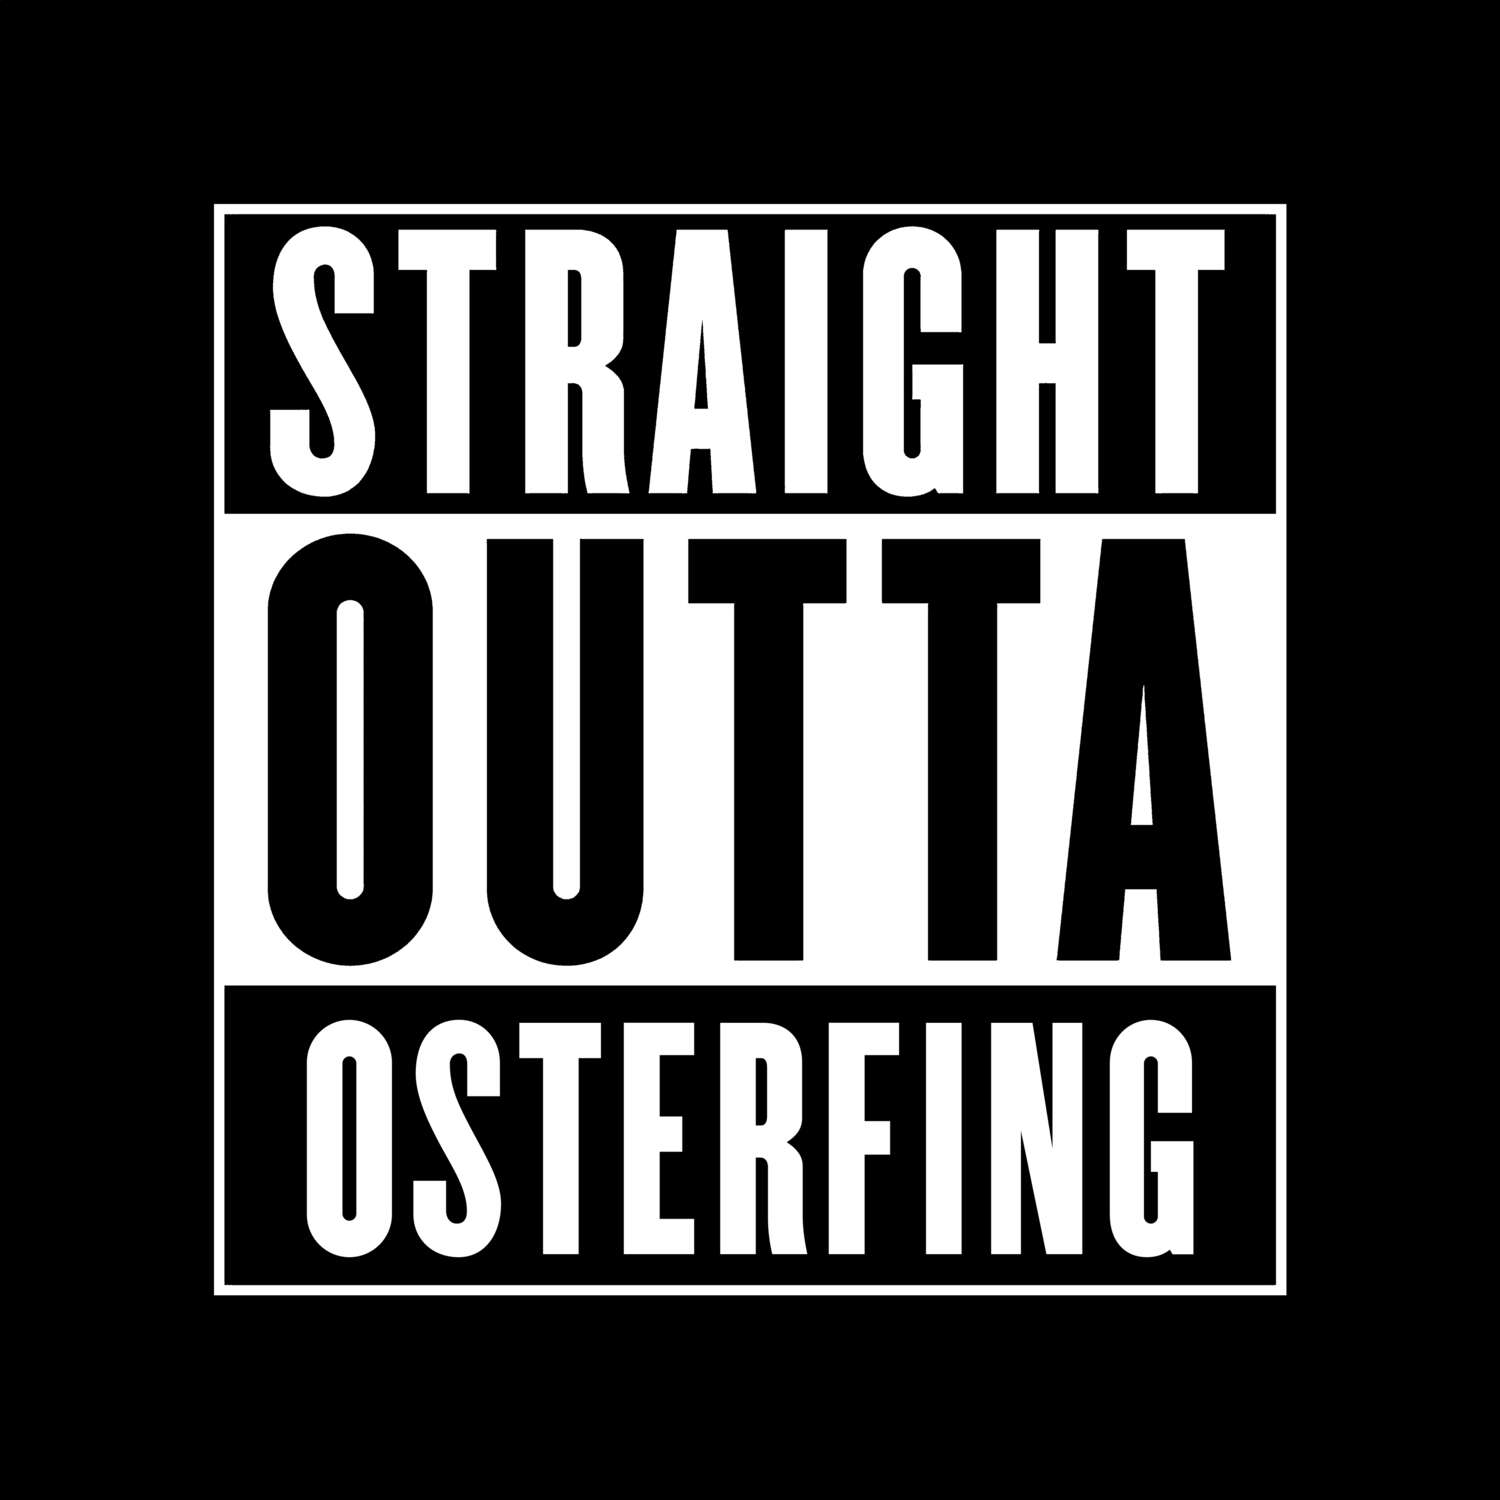 Osterfing T-Shirt »Straight Outta«